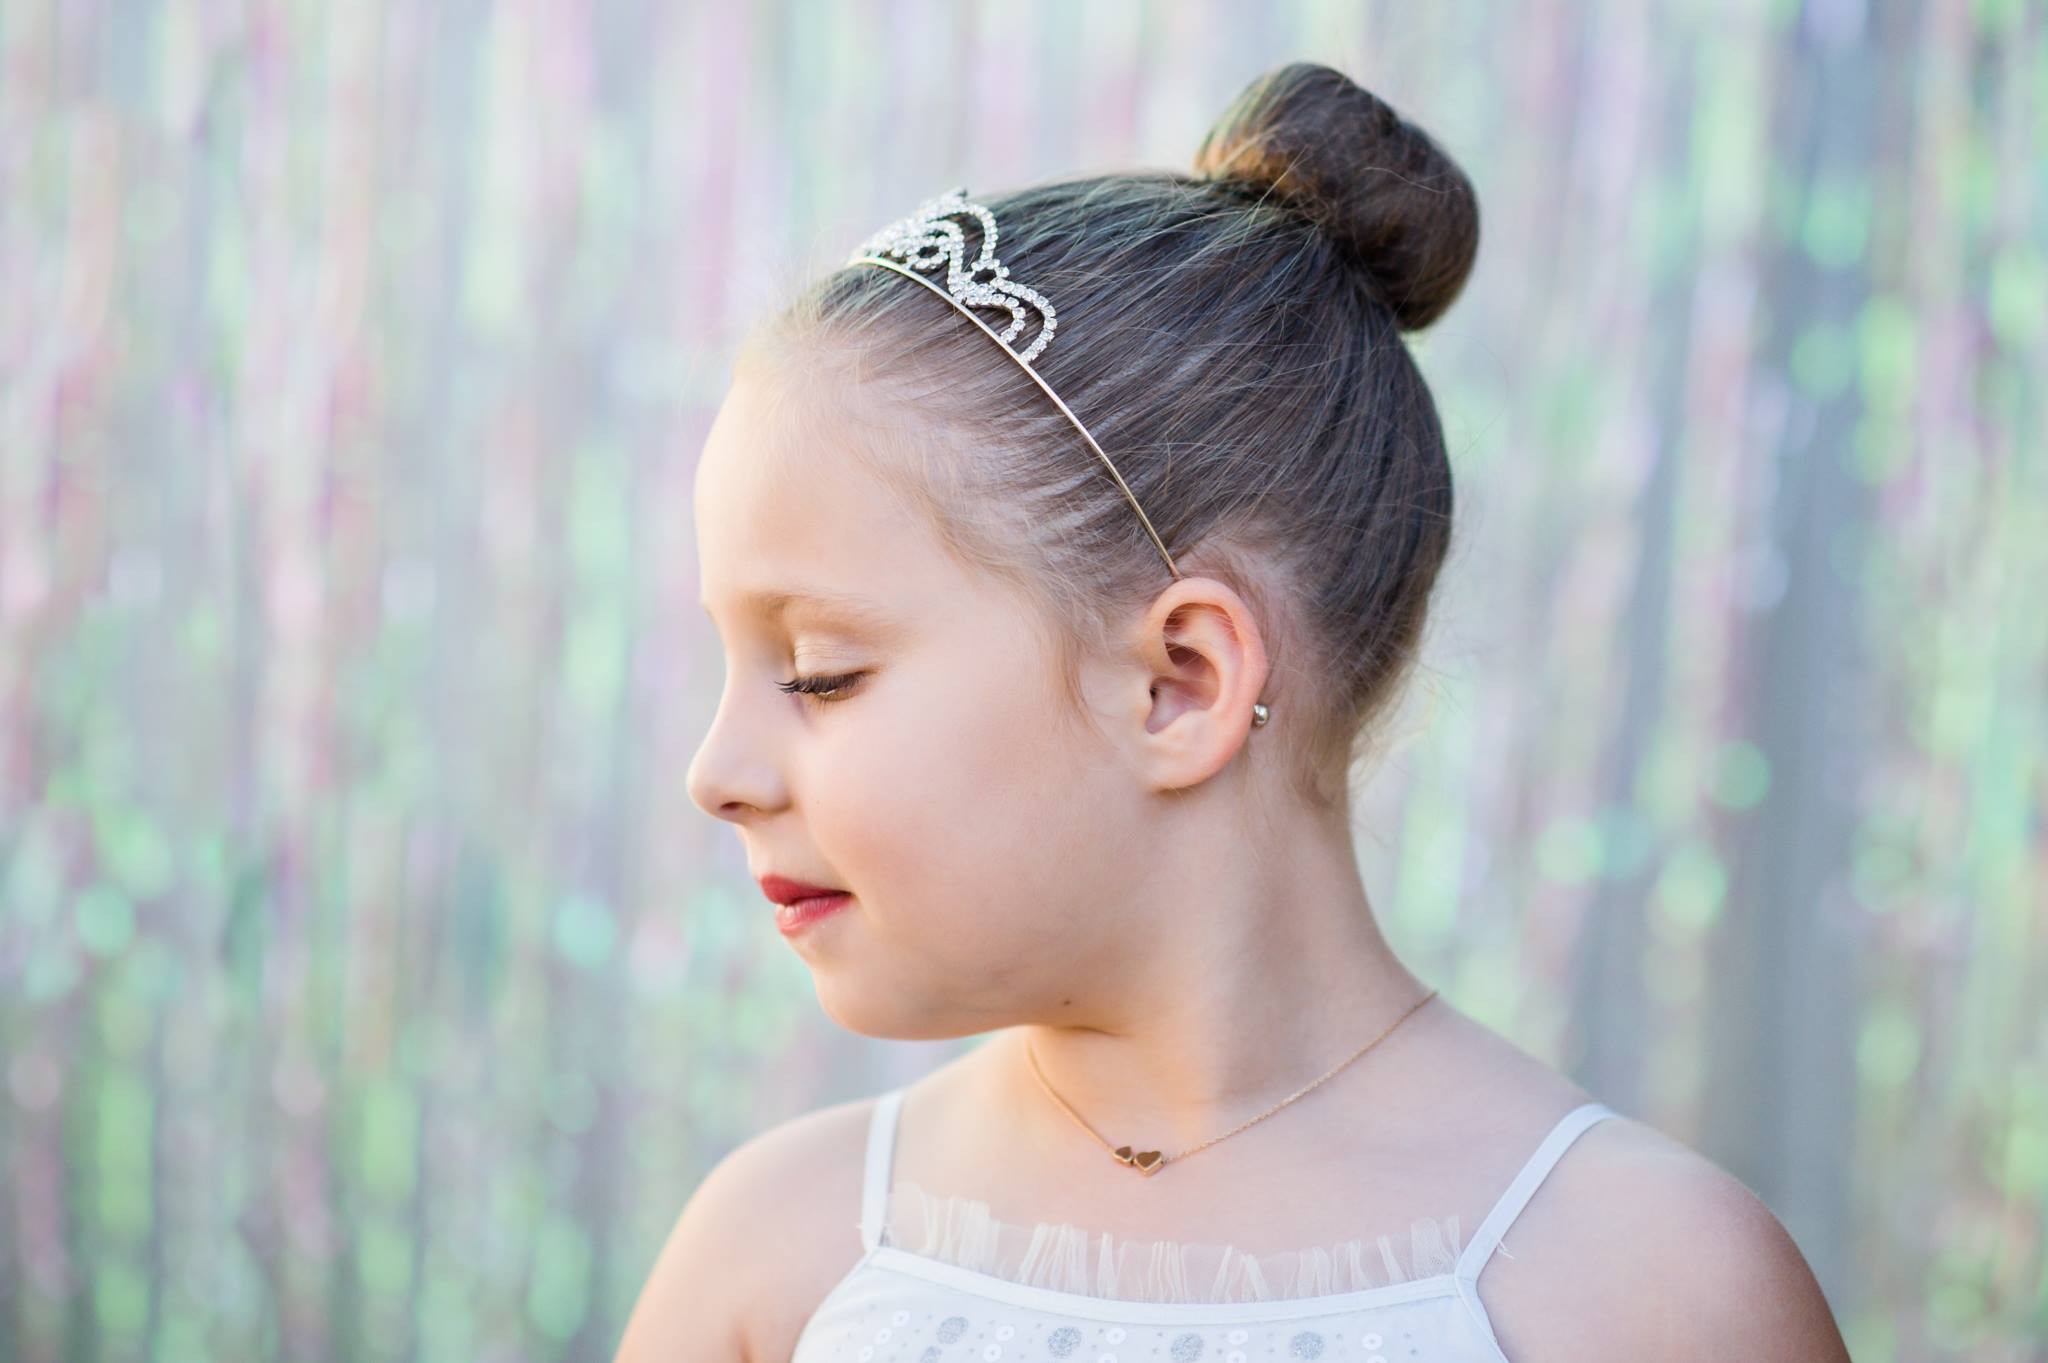 girl wearing a tiara with curtain photo backdrop